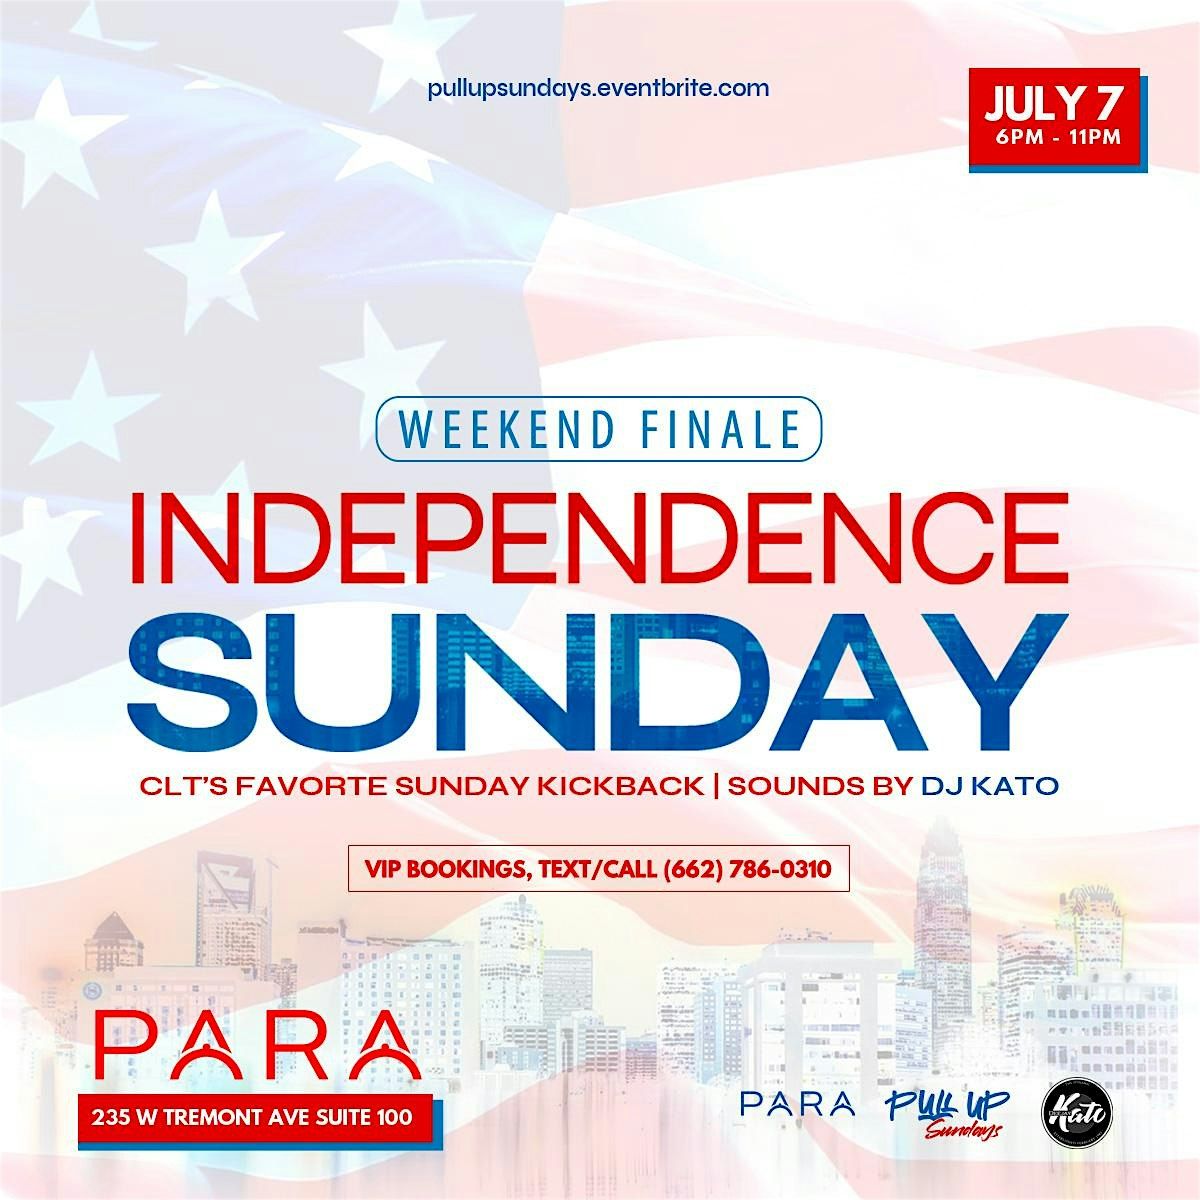 Pull-Up SUNdays @PARA, Independence Weekend Finale!